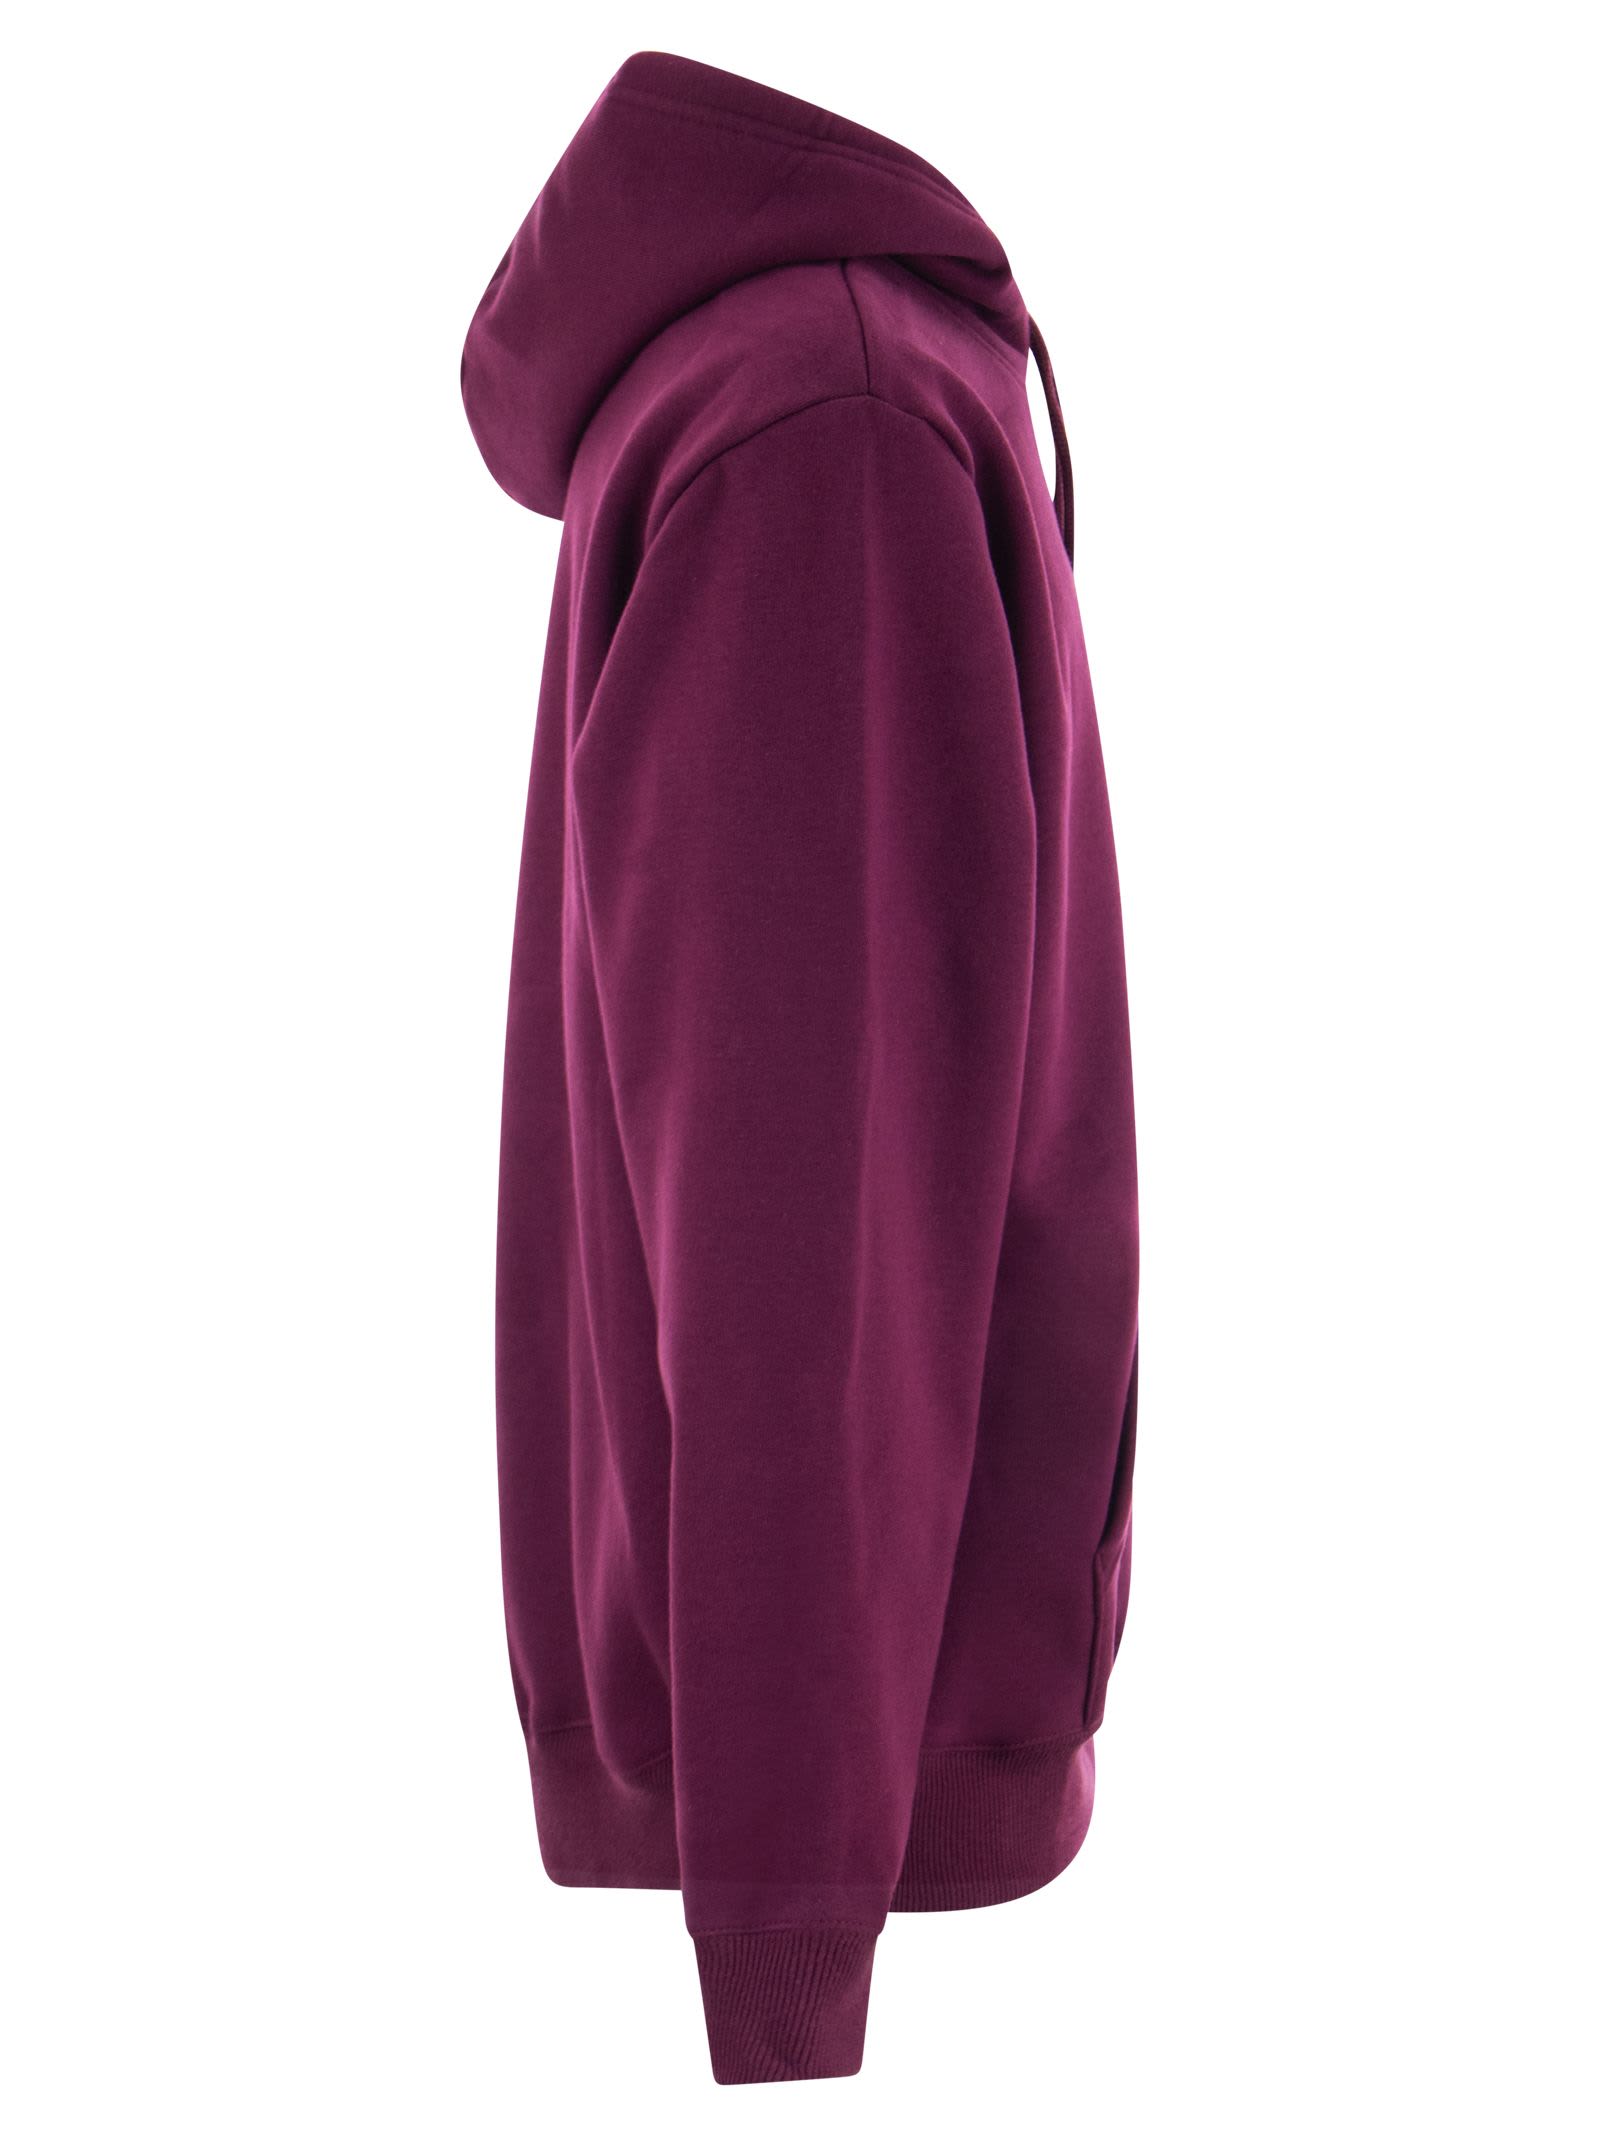 Shop The North Face Heavyweight - Hoodie In Violet